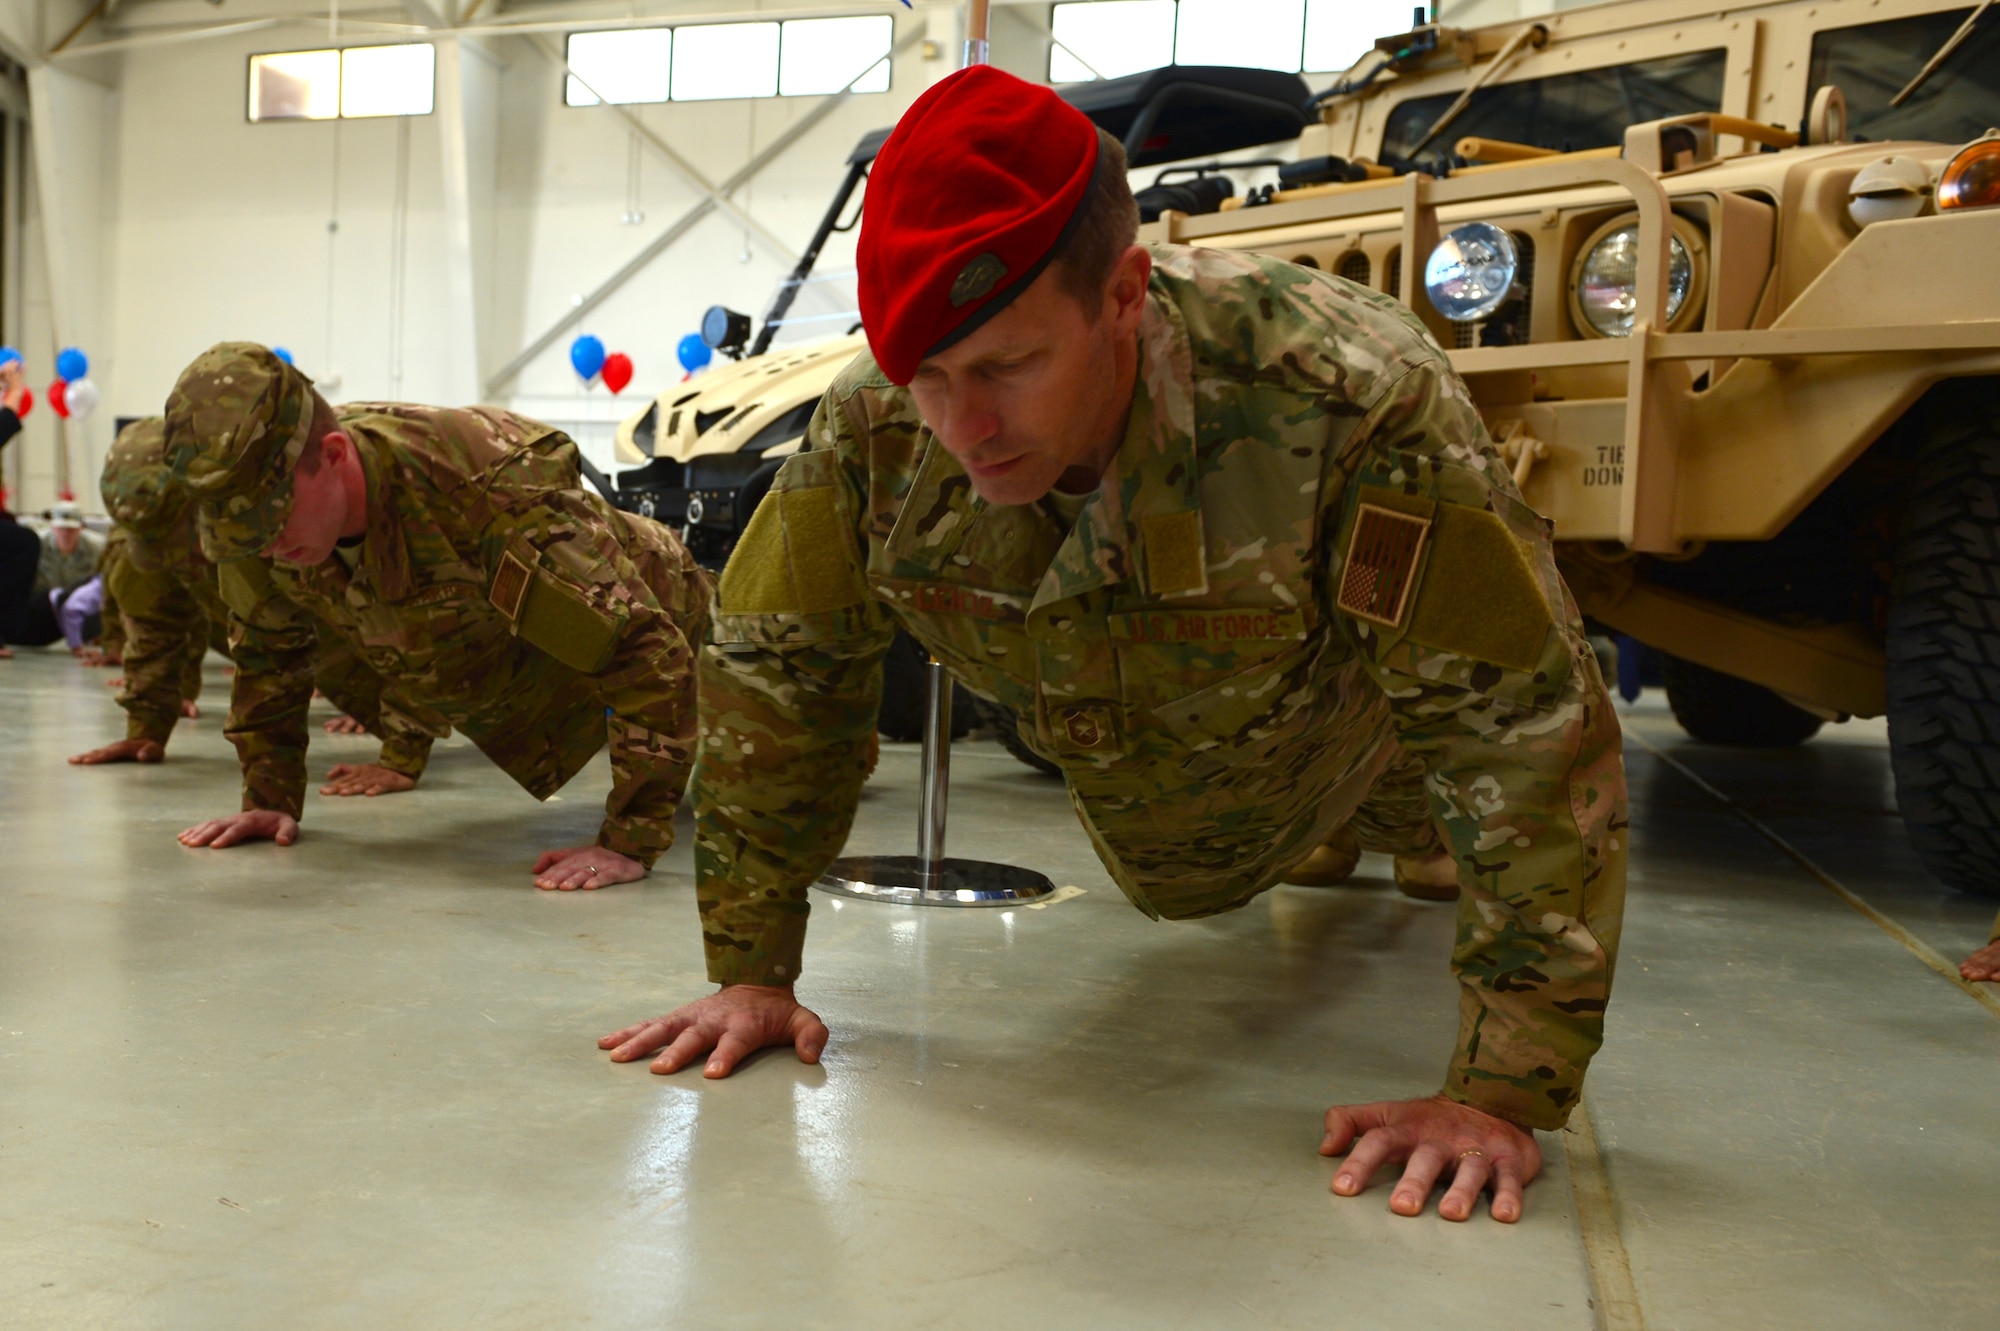 Members of the 26th Special Tactics Squadron complete memorial pushups during a squadron activation ceremony, April 24, 2014 at Cannon Air Force Base, N.M. The 26 STS, formerly Detachment 1 of the 720th Special Tactics Group, Hurlburt Field, Fla., is a newly activated squadron based at Cannon. (U.S. Air Force photo/ Senior Airman Eboni Reece)